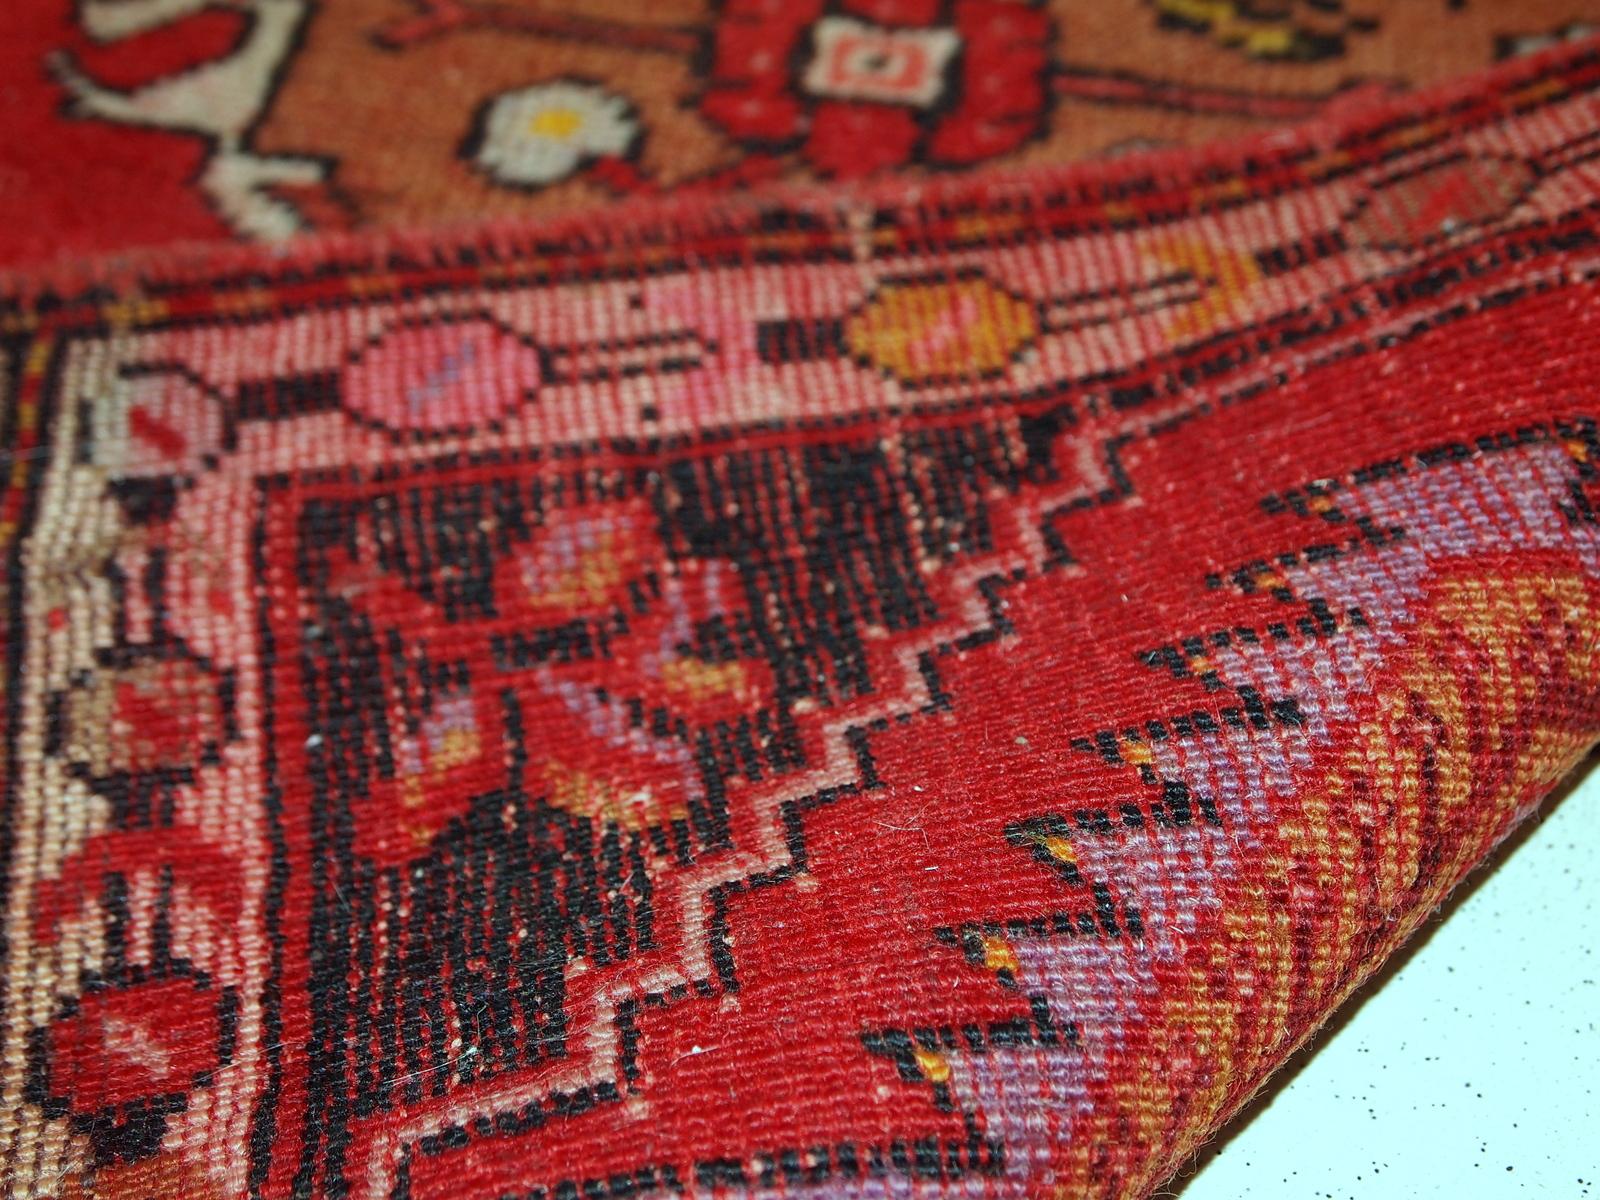 Handmade vintage Turkish Yastik rug in bright red color. The rug is in original good condition from the mid-20th century.

- Condition: original good,

- circa 1960s,

- Size: 1.6' x 3.1' (50cm x 96cm),

- Material: wool,

- Country of